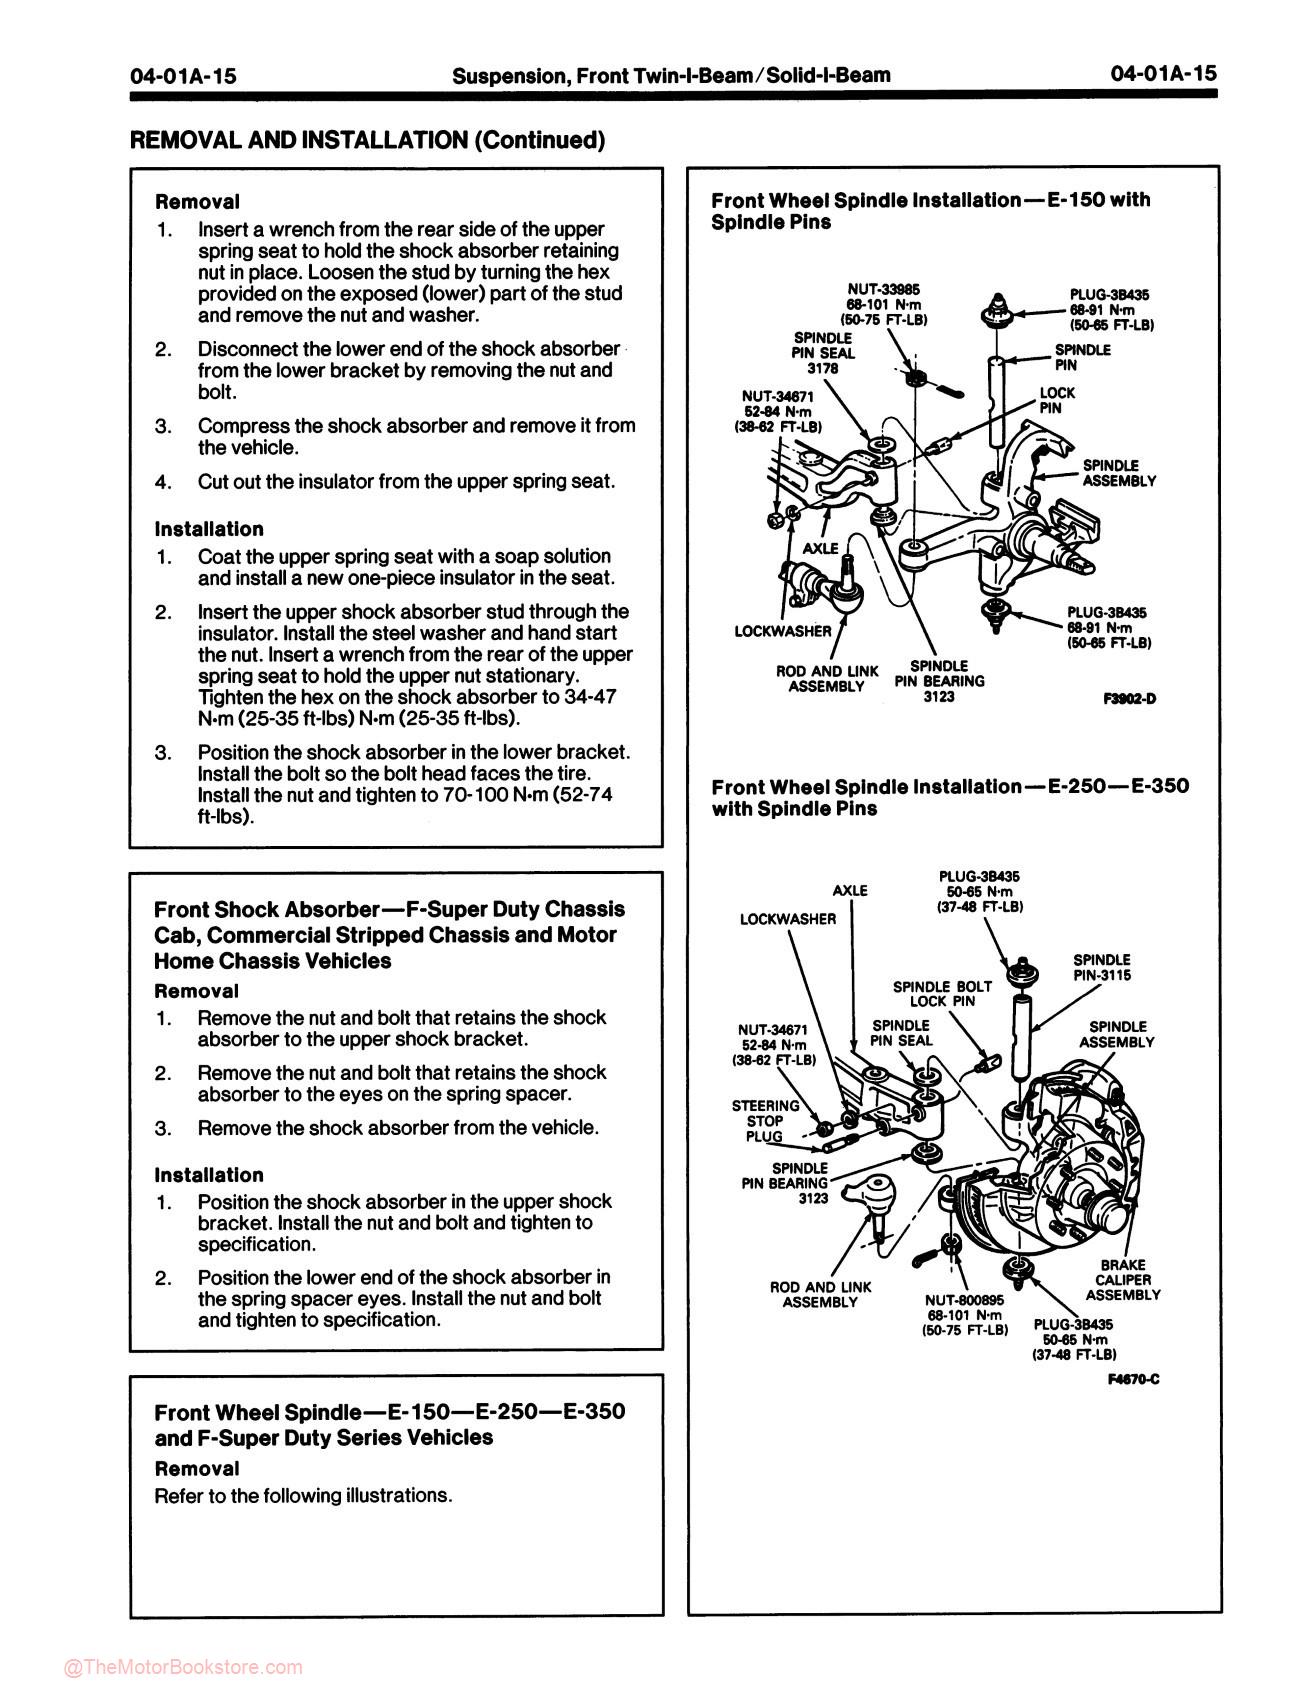 1991 Ford Truck, Bronco, Econoline Shop Manual - F-Series - Sample Page 1